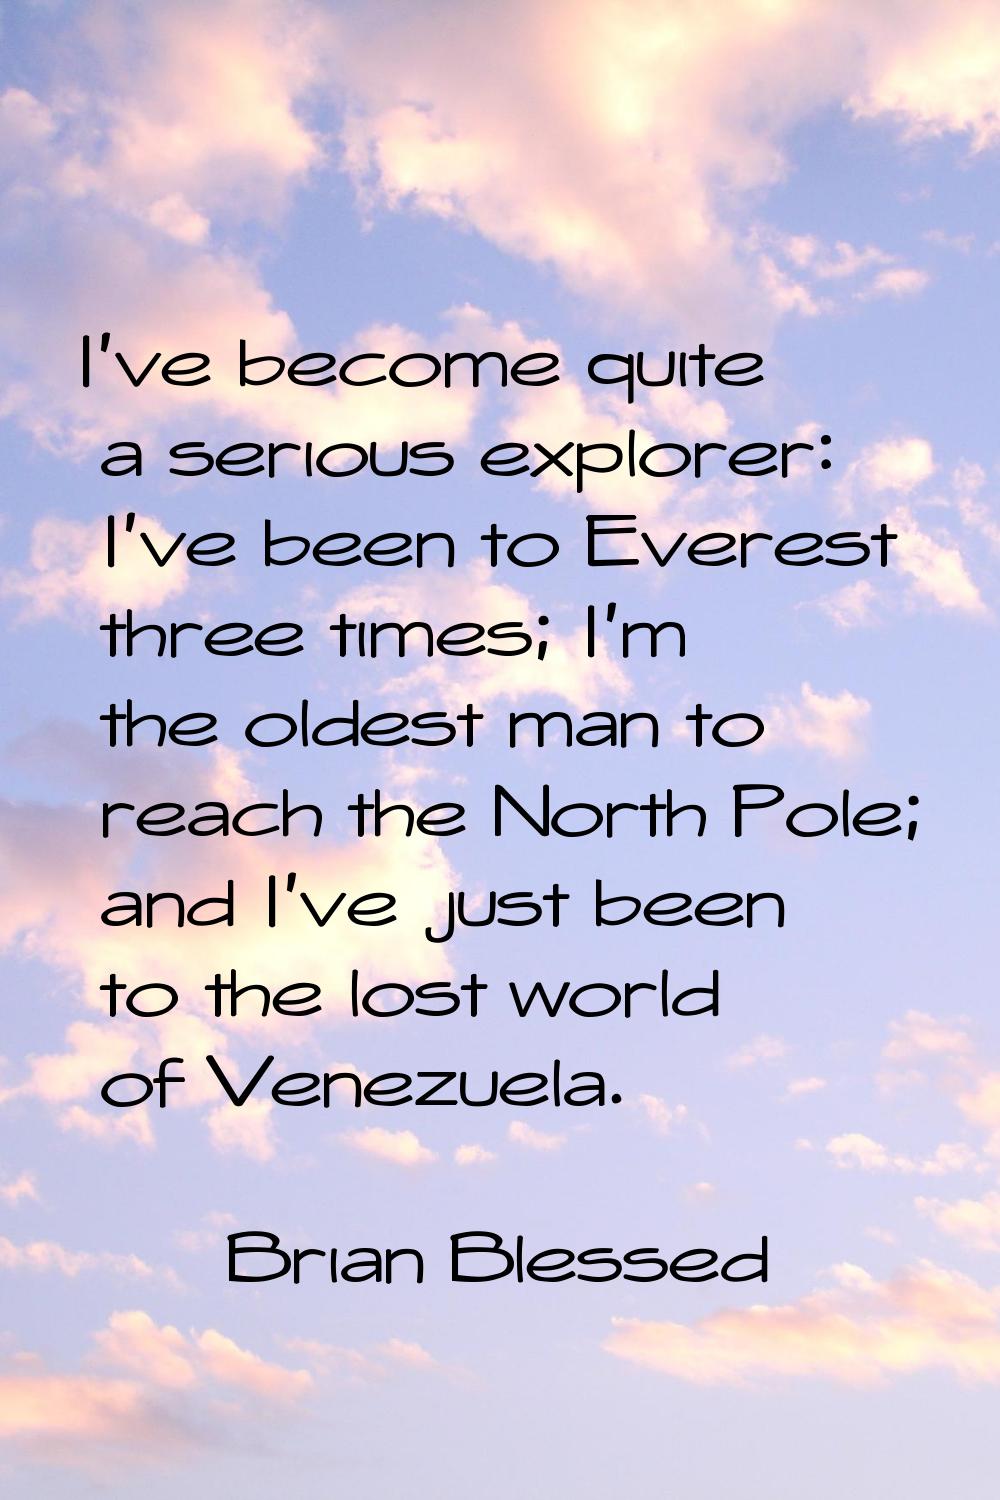 I've become quite a serious explorer: I've been to Everest three times; I'm the oldest man to reach